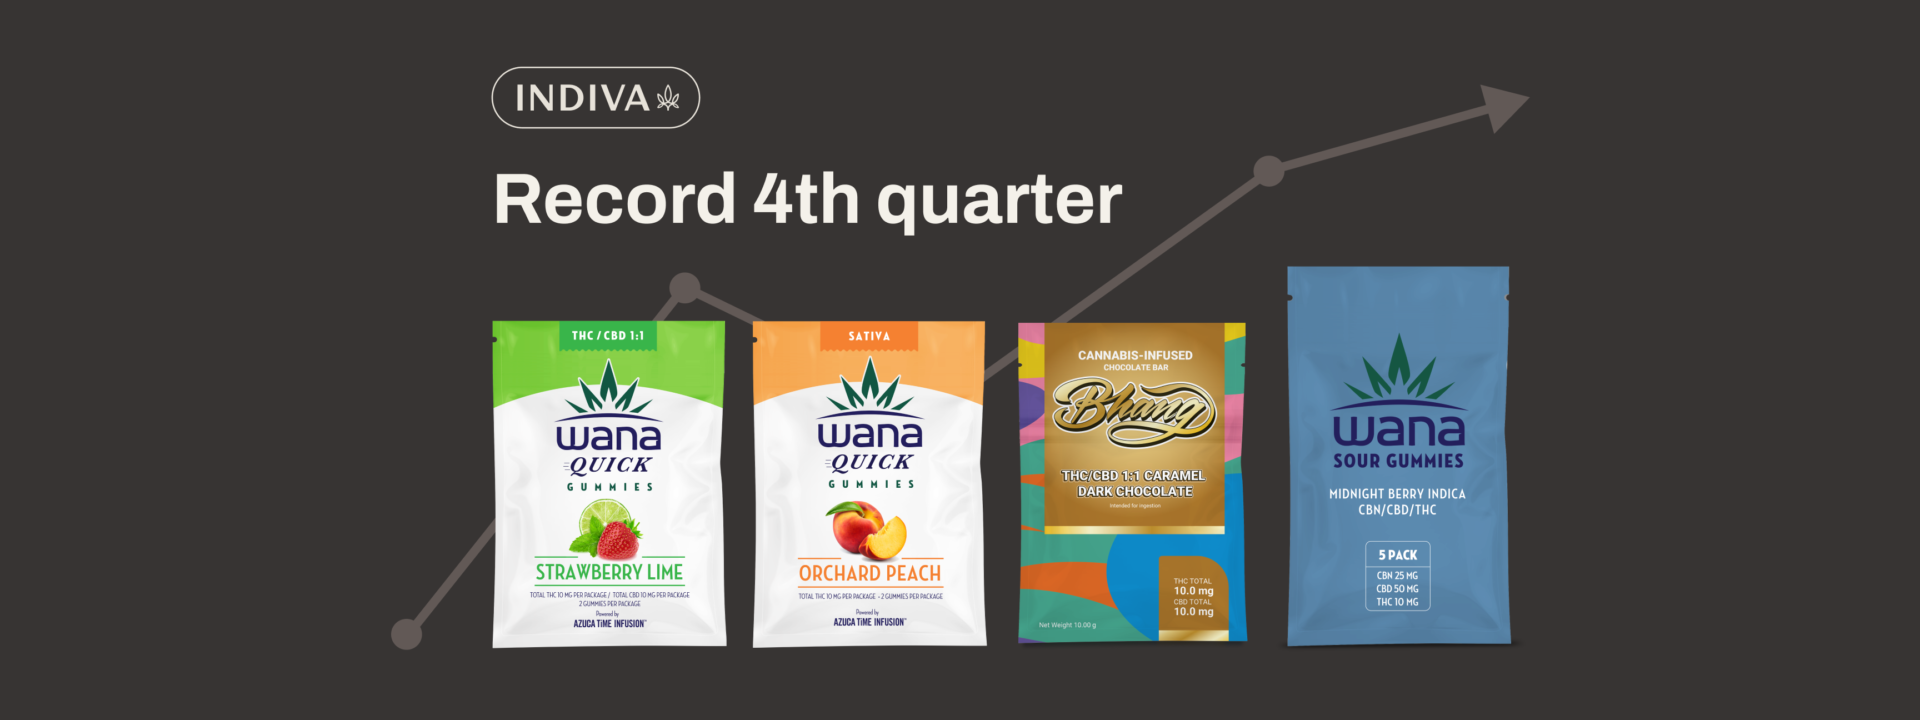 Press Release – Indiva Reports Record Fourth Quarter and Fiscal Year 2021 Results